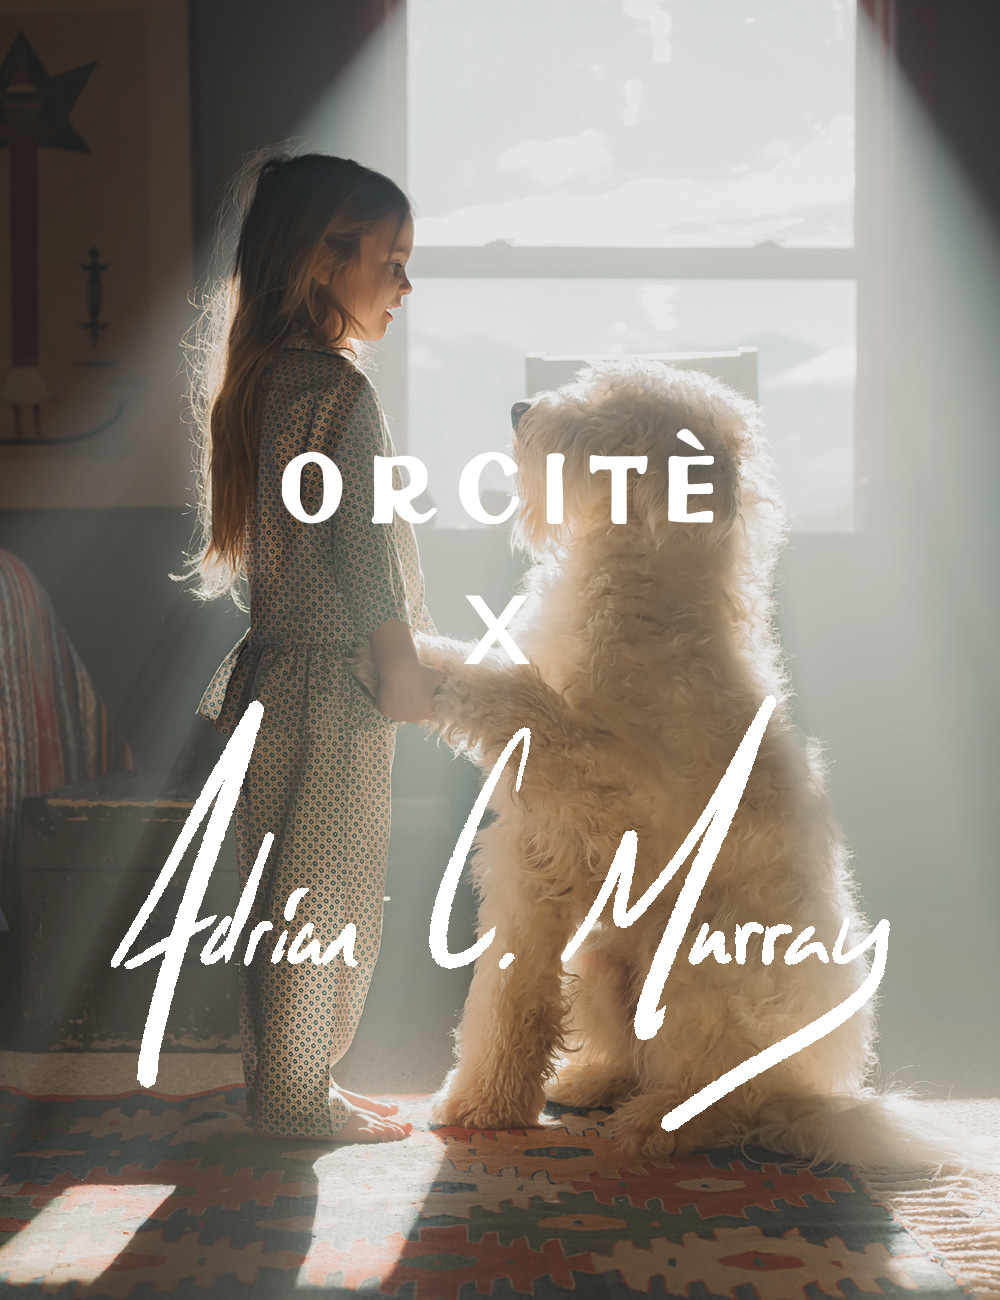 Orcite X Adrian C. Murray Collaboration